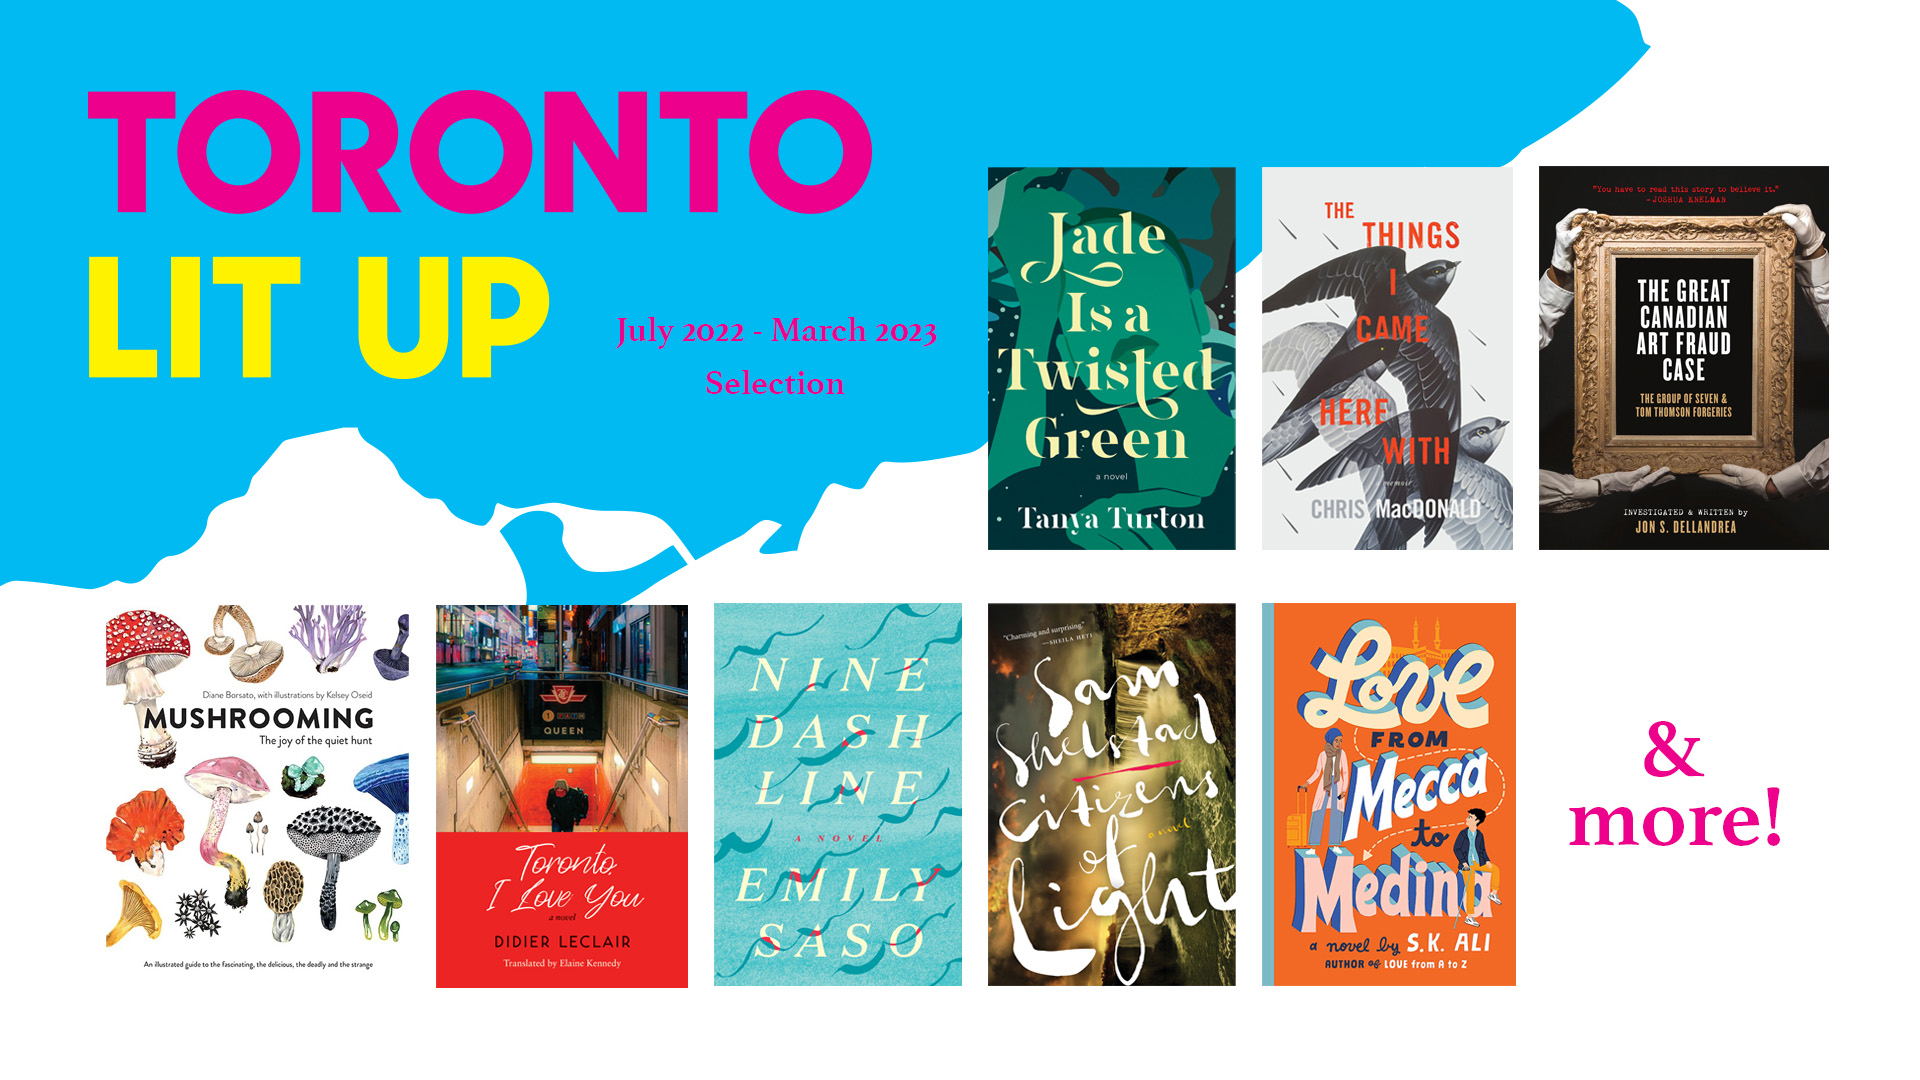 Toronto Lit Up website banner featuring 8 of the 21 selected books. Has the text 